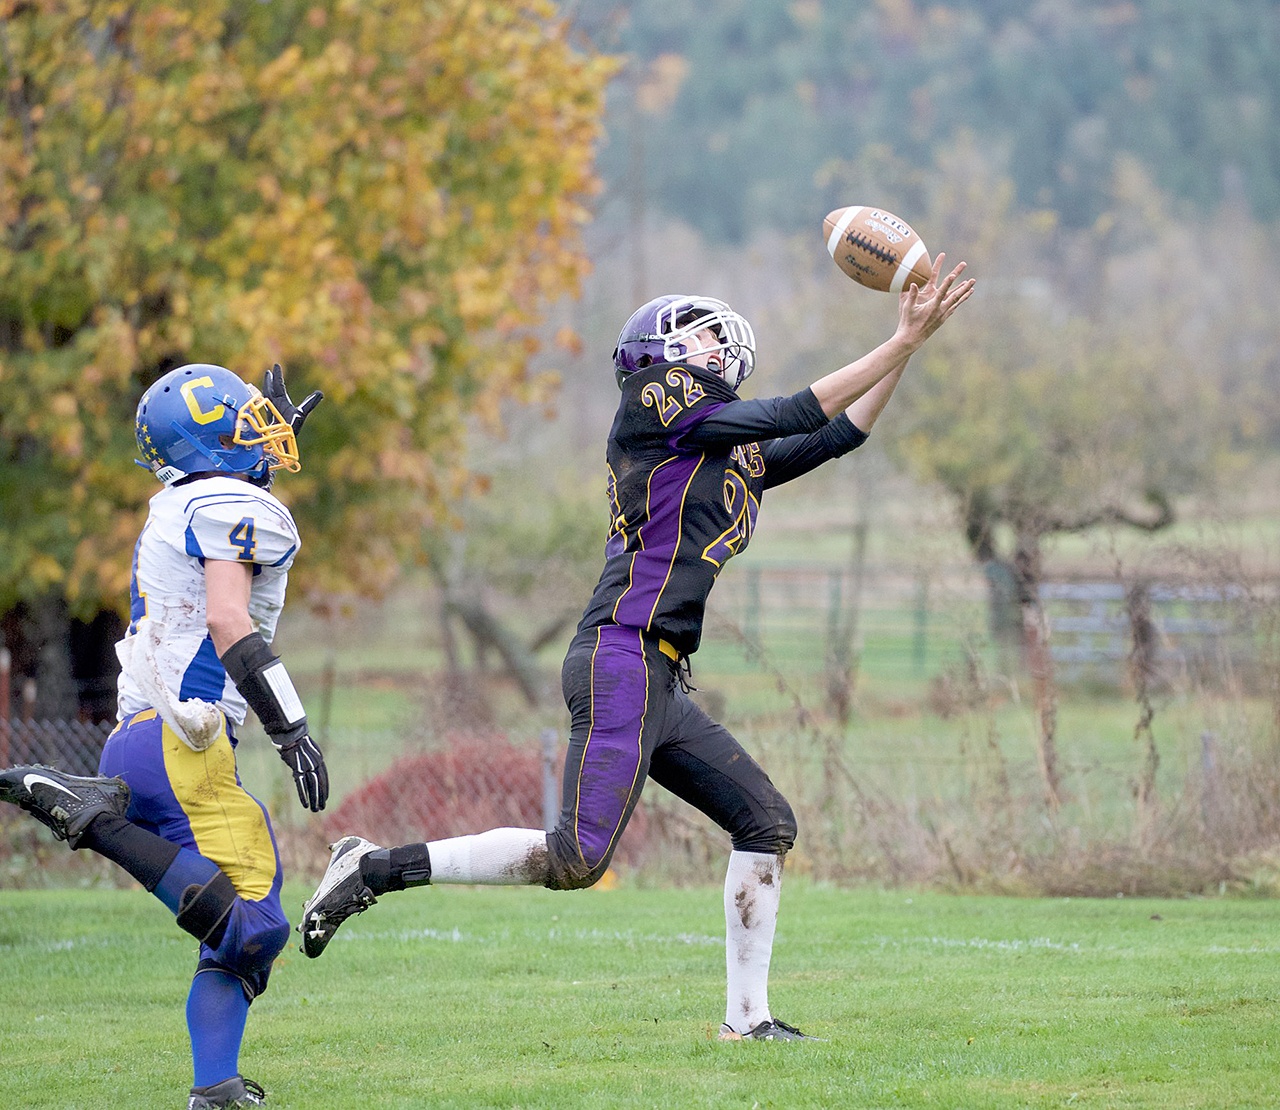 Steve Mullensky/for Peninsula Daily News Quilcene’s Jarod Smith, right, beats out Crescent’s Eric Emery and hauls in a 30-yard touchdown pass during a game played in Quilcene last fall.